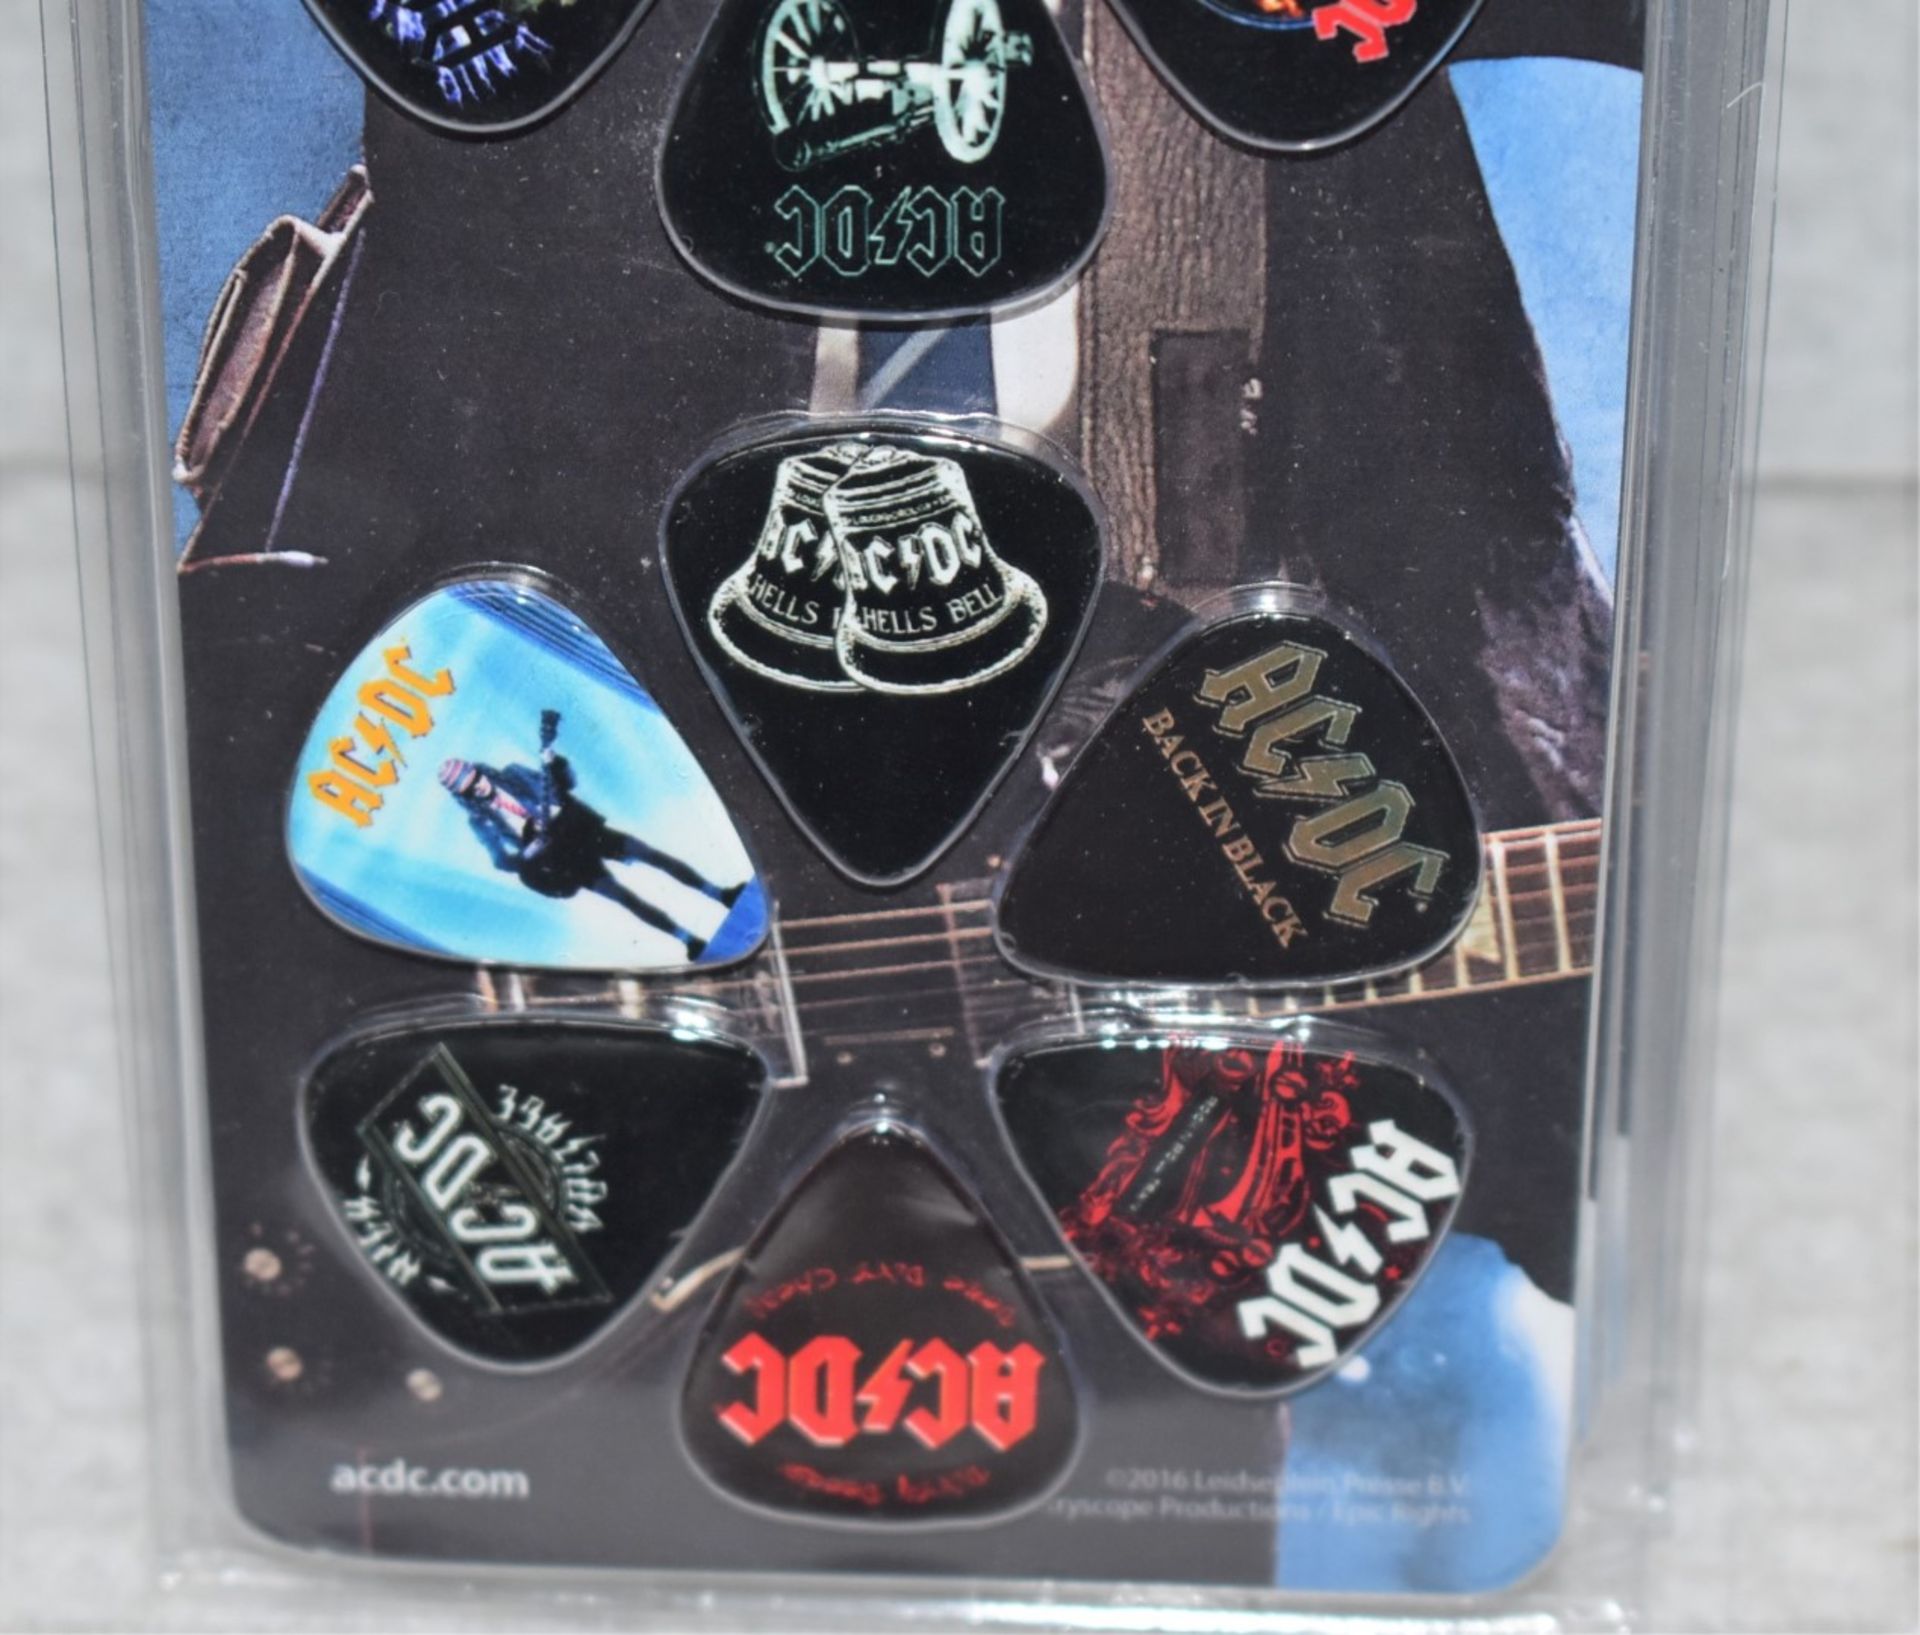 10 x ACDC Guitar Pick Multipacks By Perri's - 6 Picks Per Pack - Officially Licensed Merchandise - - Image 8 of 8